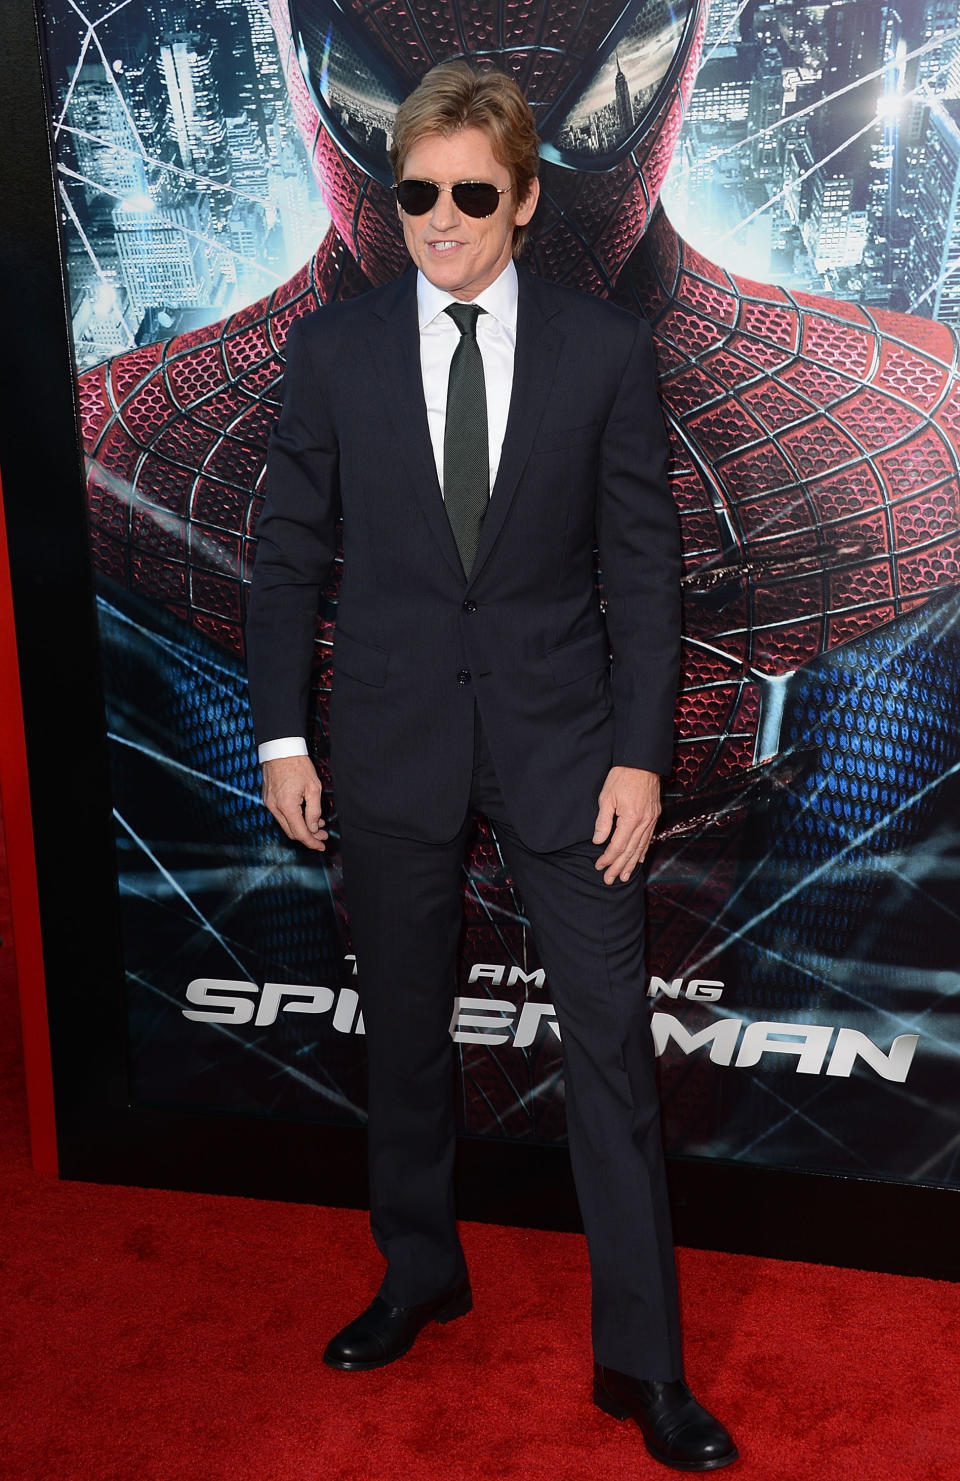 Premiere Of Columbia Pictures' "The Amazing Spider-Man" - Arrivals